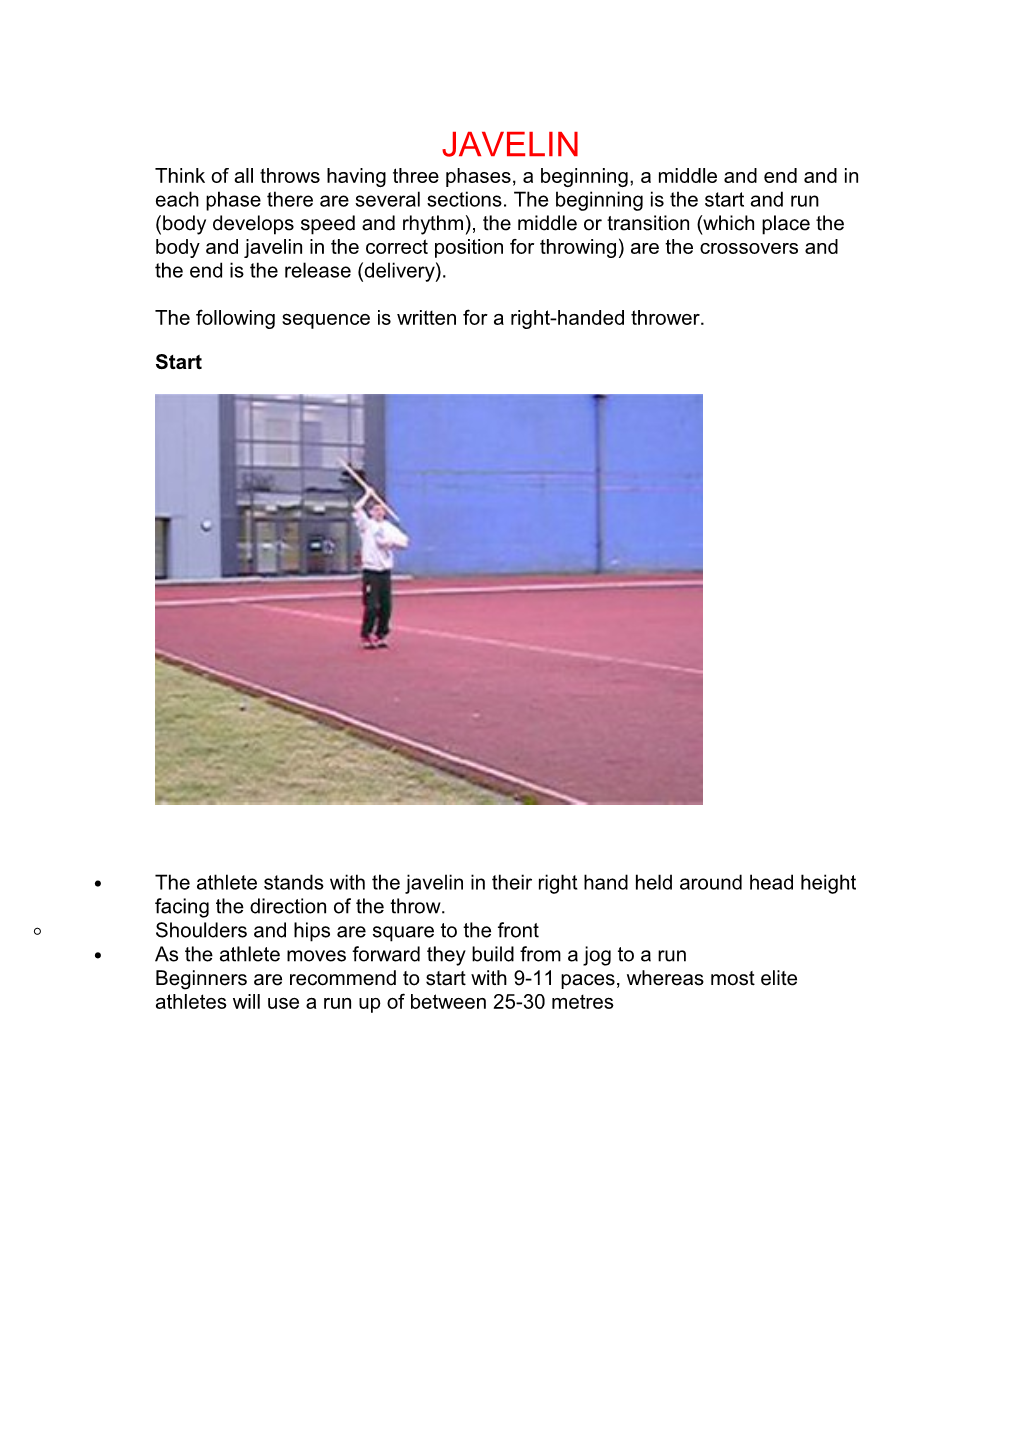 The Following Sequence Is Written for a Right-Handed Thrower